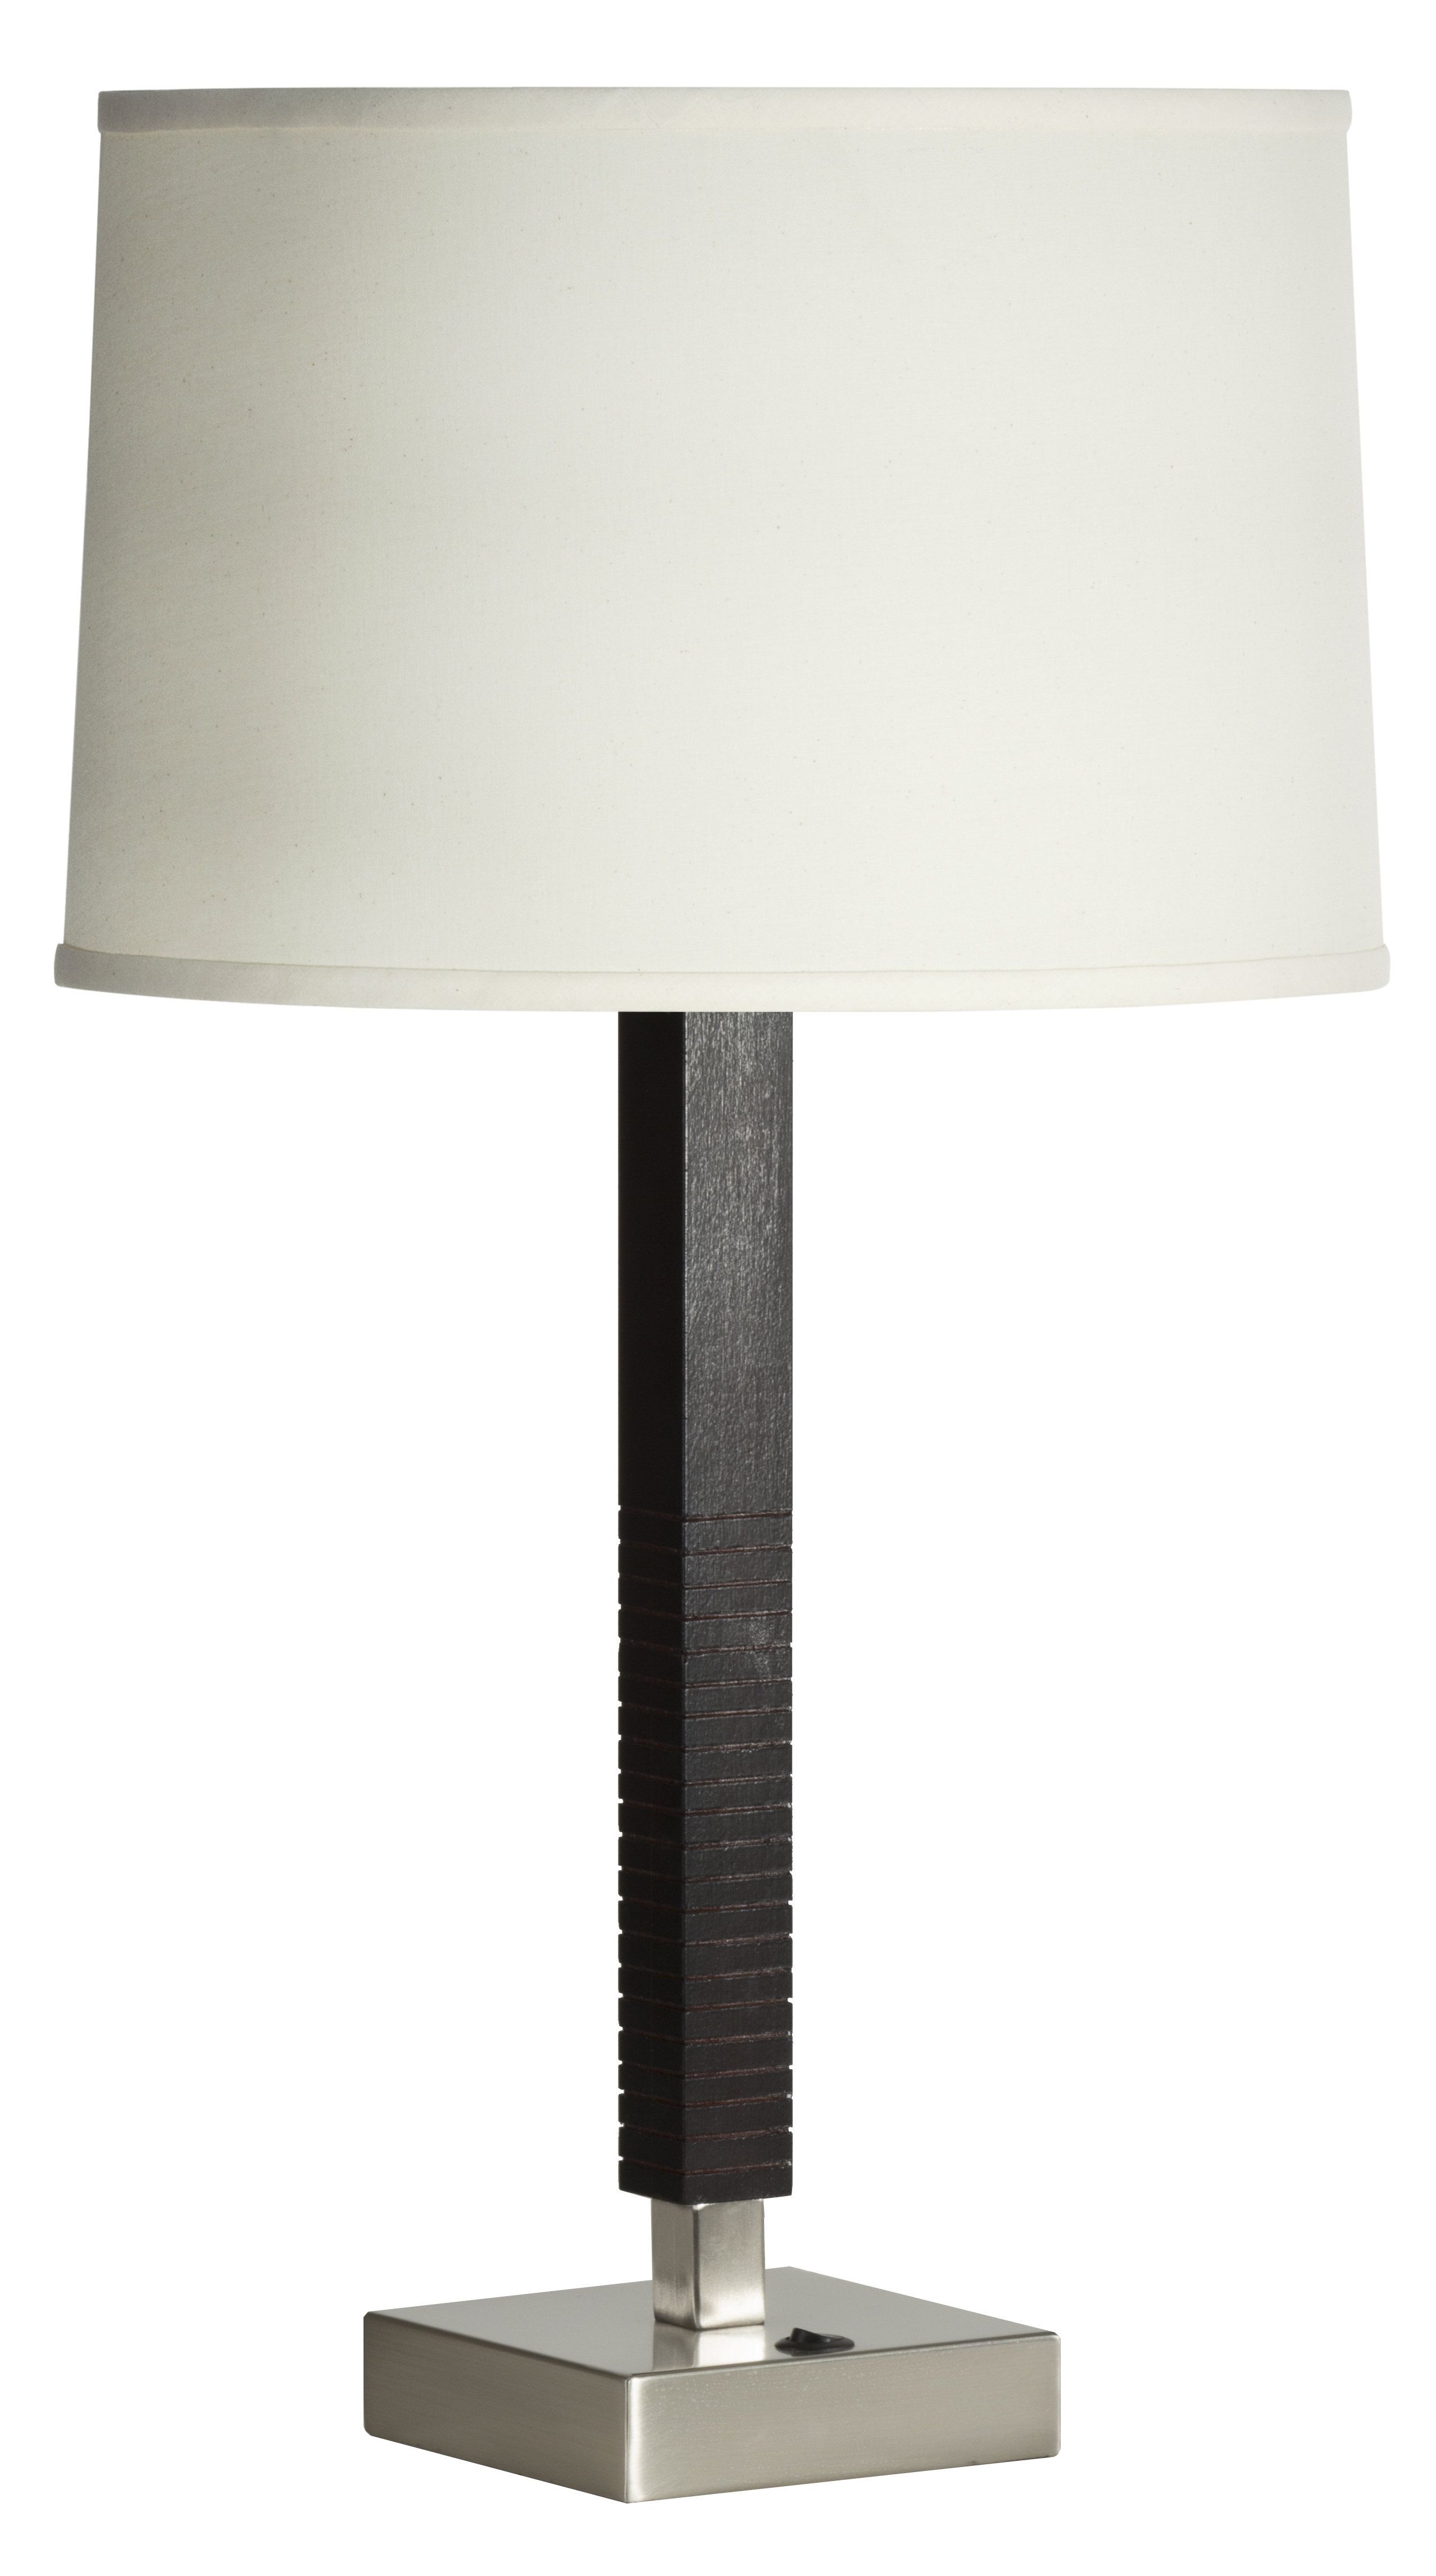 Orren Ellis Caskey 28" Table Lamp | Wayfair With Balboa Carved Console Tables (Photo 30 of 30)